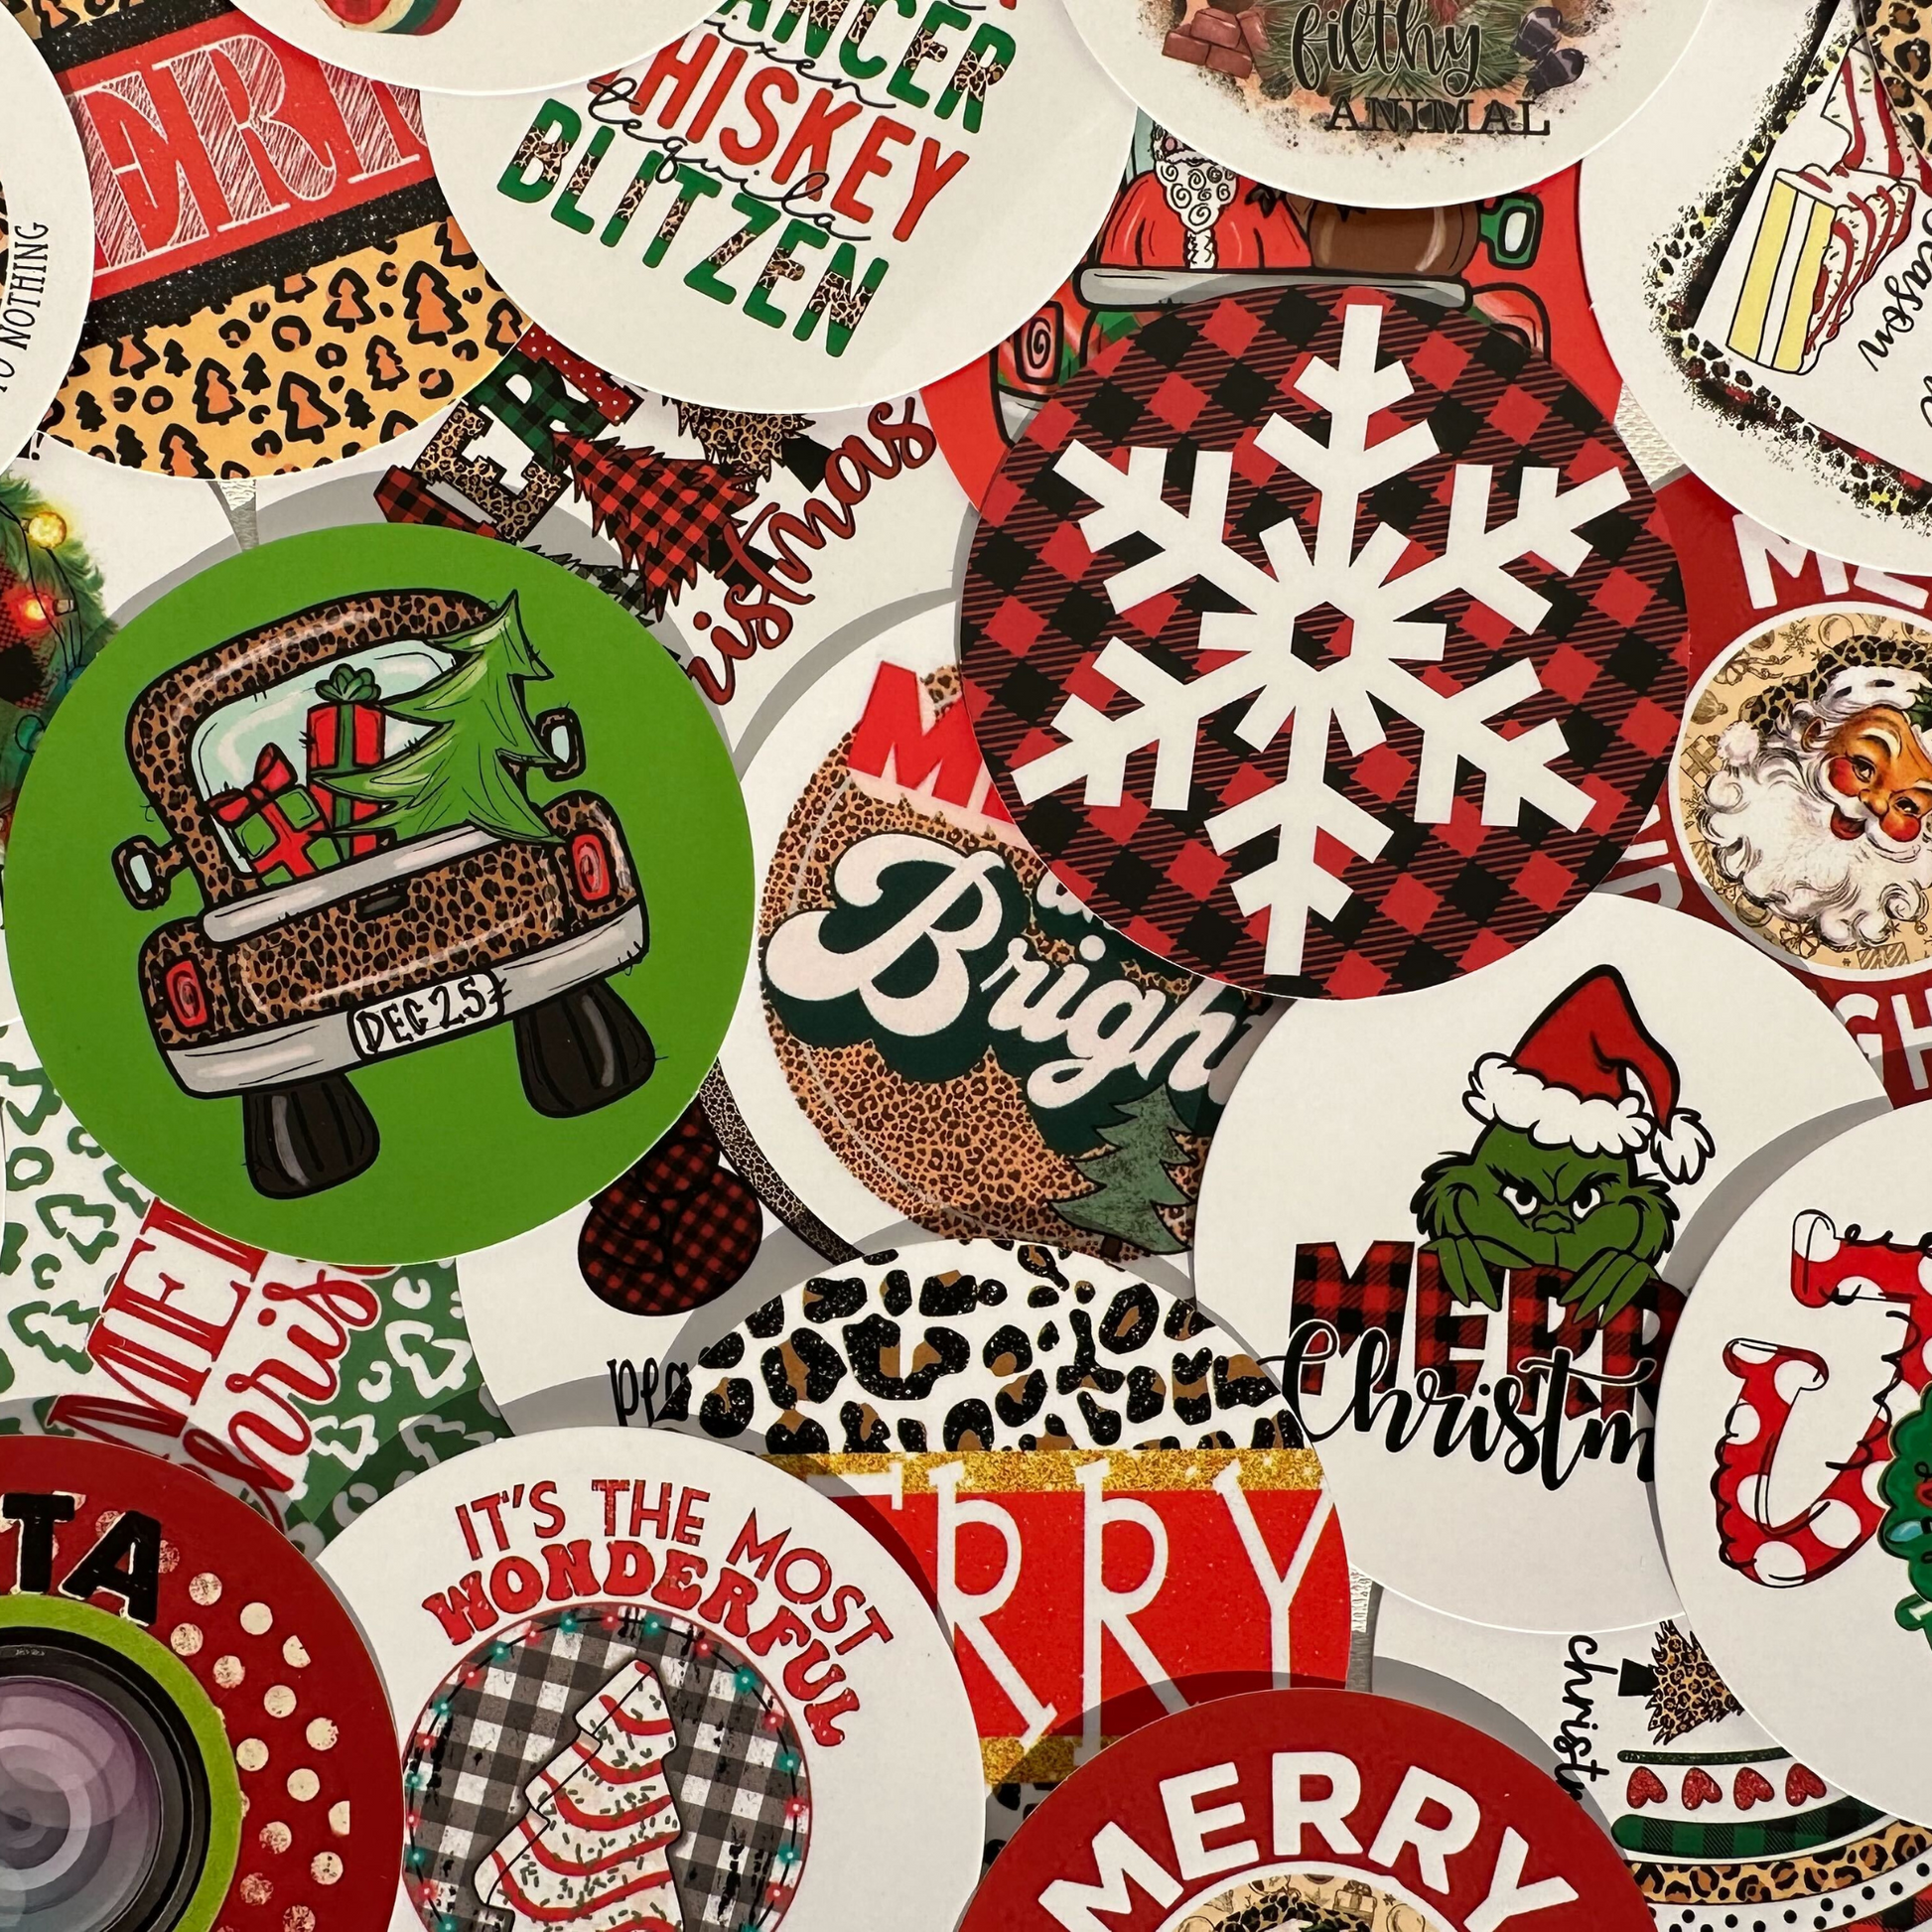 Christmas Cardstock Cutout Circles for Freshies, 24 Cardstock Cutouts For